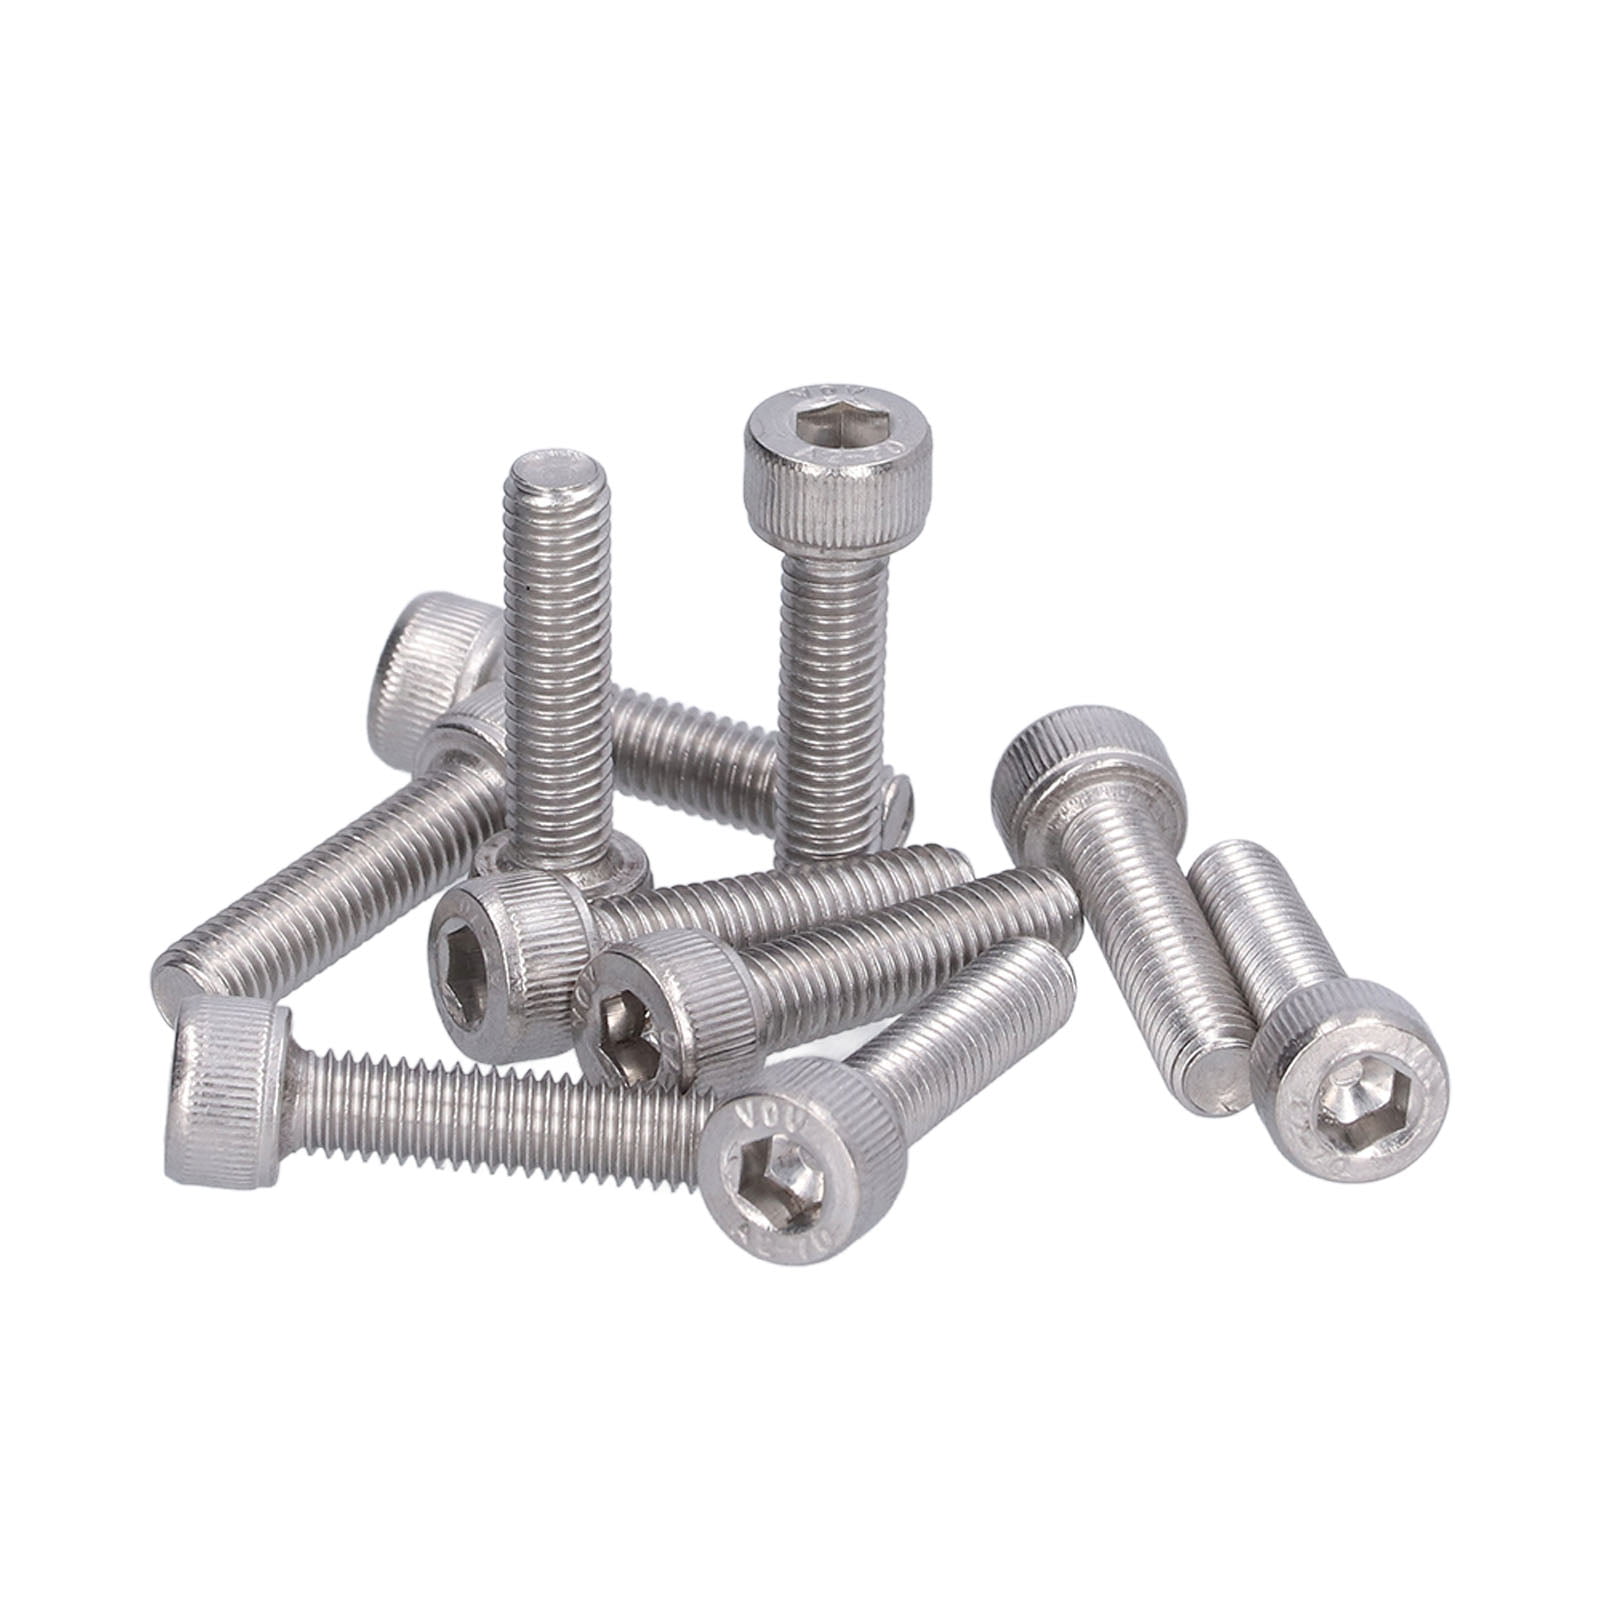 Metric Hexagon Headed Dome Steel Nuts BZP Standard Pitch for Set Screw Bolts 